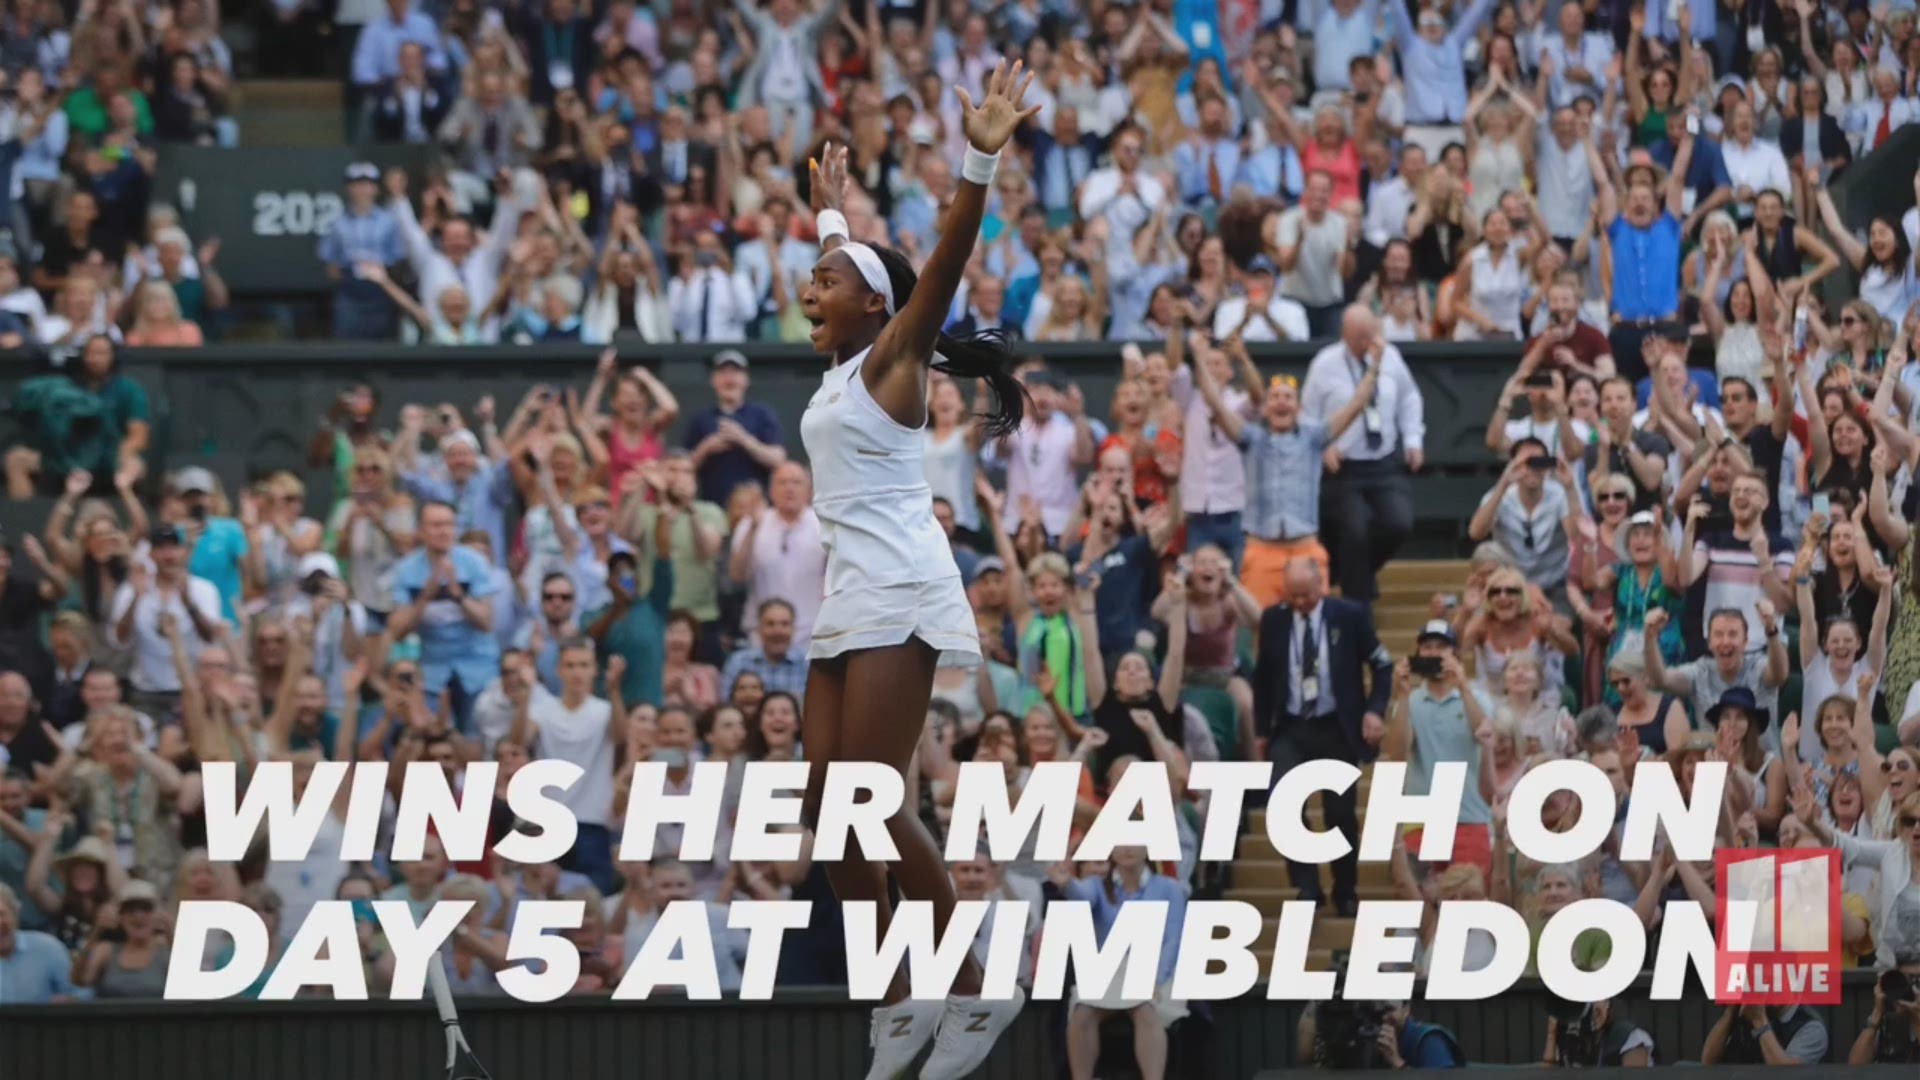 Coco Gauff wins match on day 5 of Wimbledon. Watch the match in this series of AP photos.